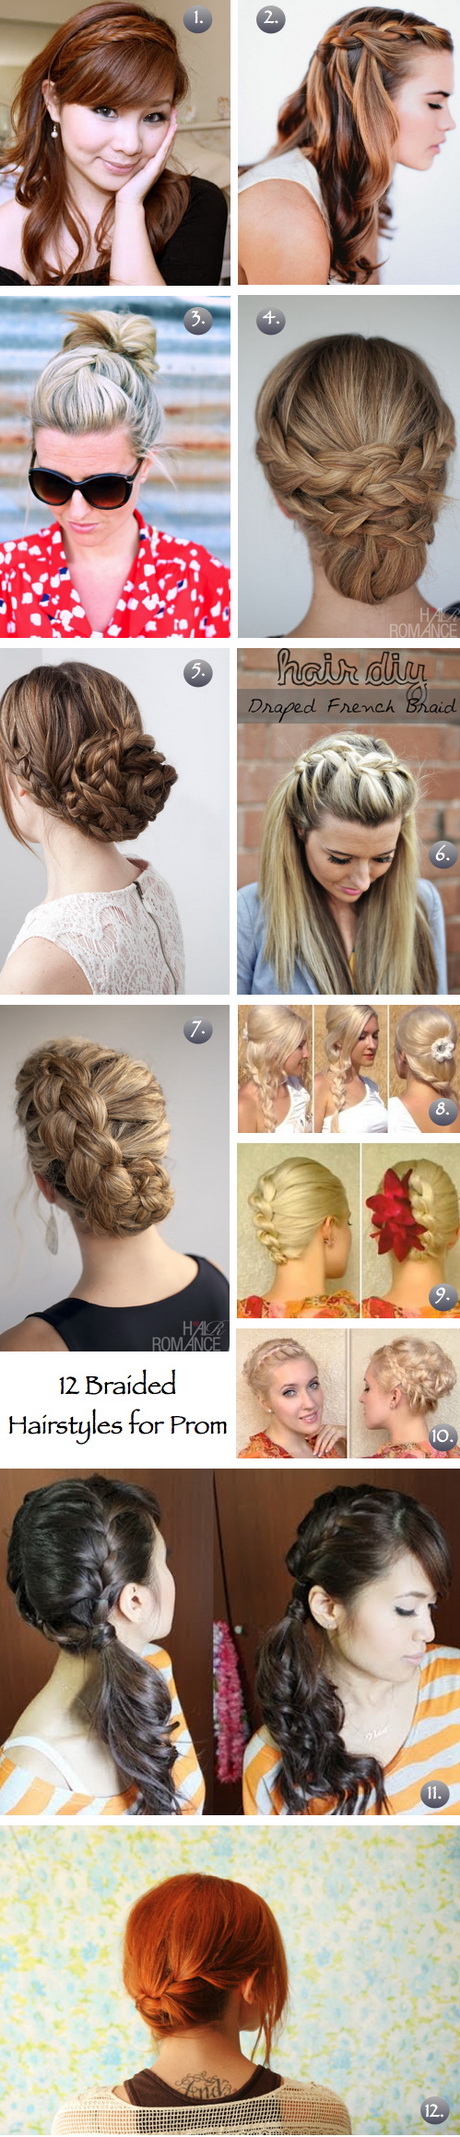 do-it-yourself-prom-hairstyles-98-17 Do it yourself prom hairstyles